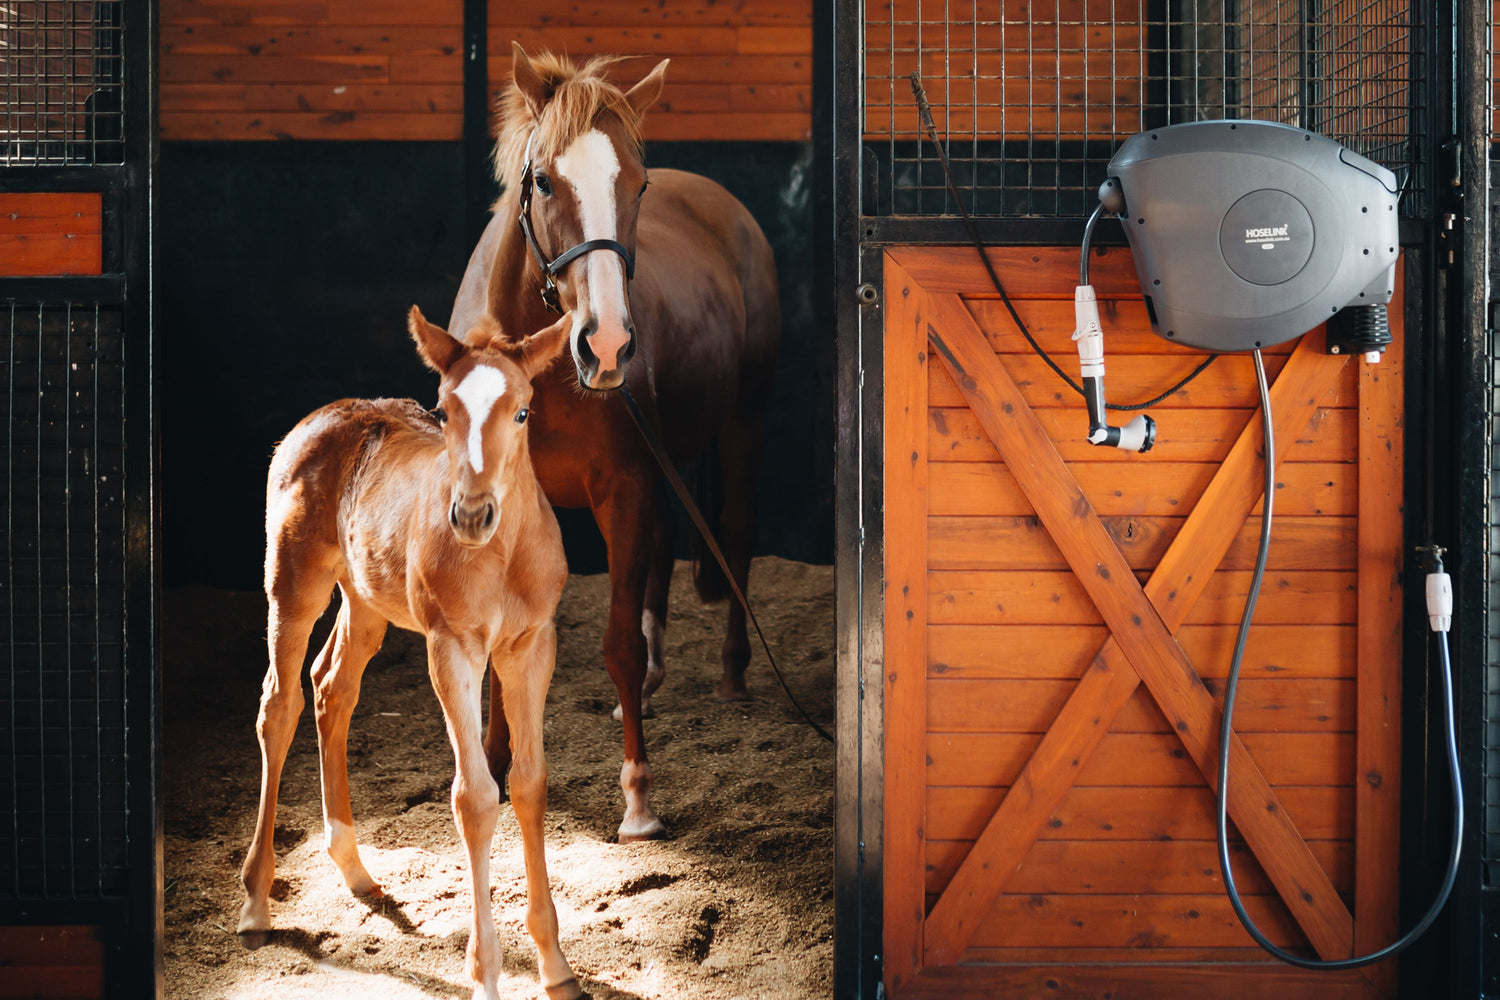 Horse and its foal standing in stable next to mounted Charcoal Retractable Hose Reel